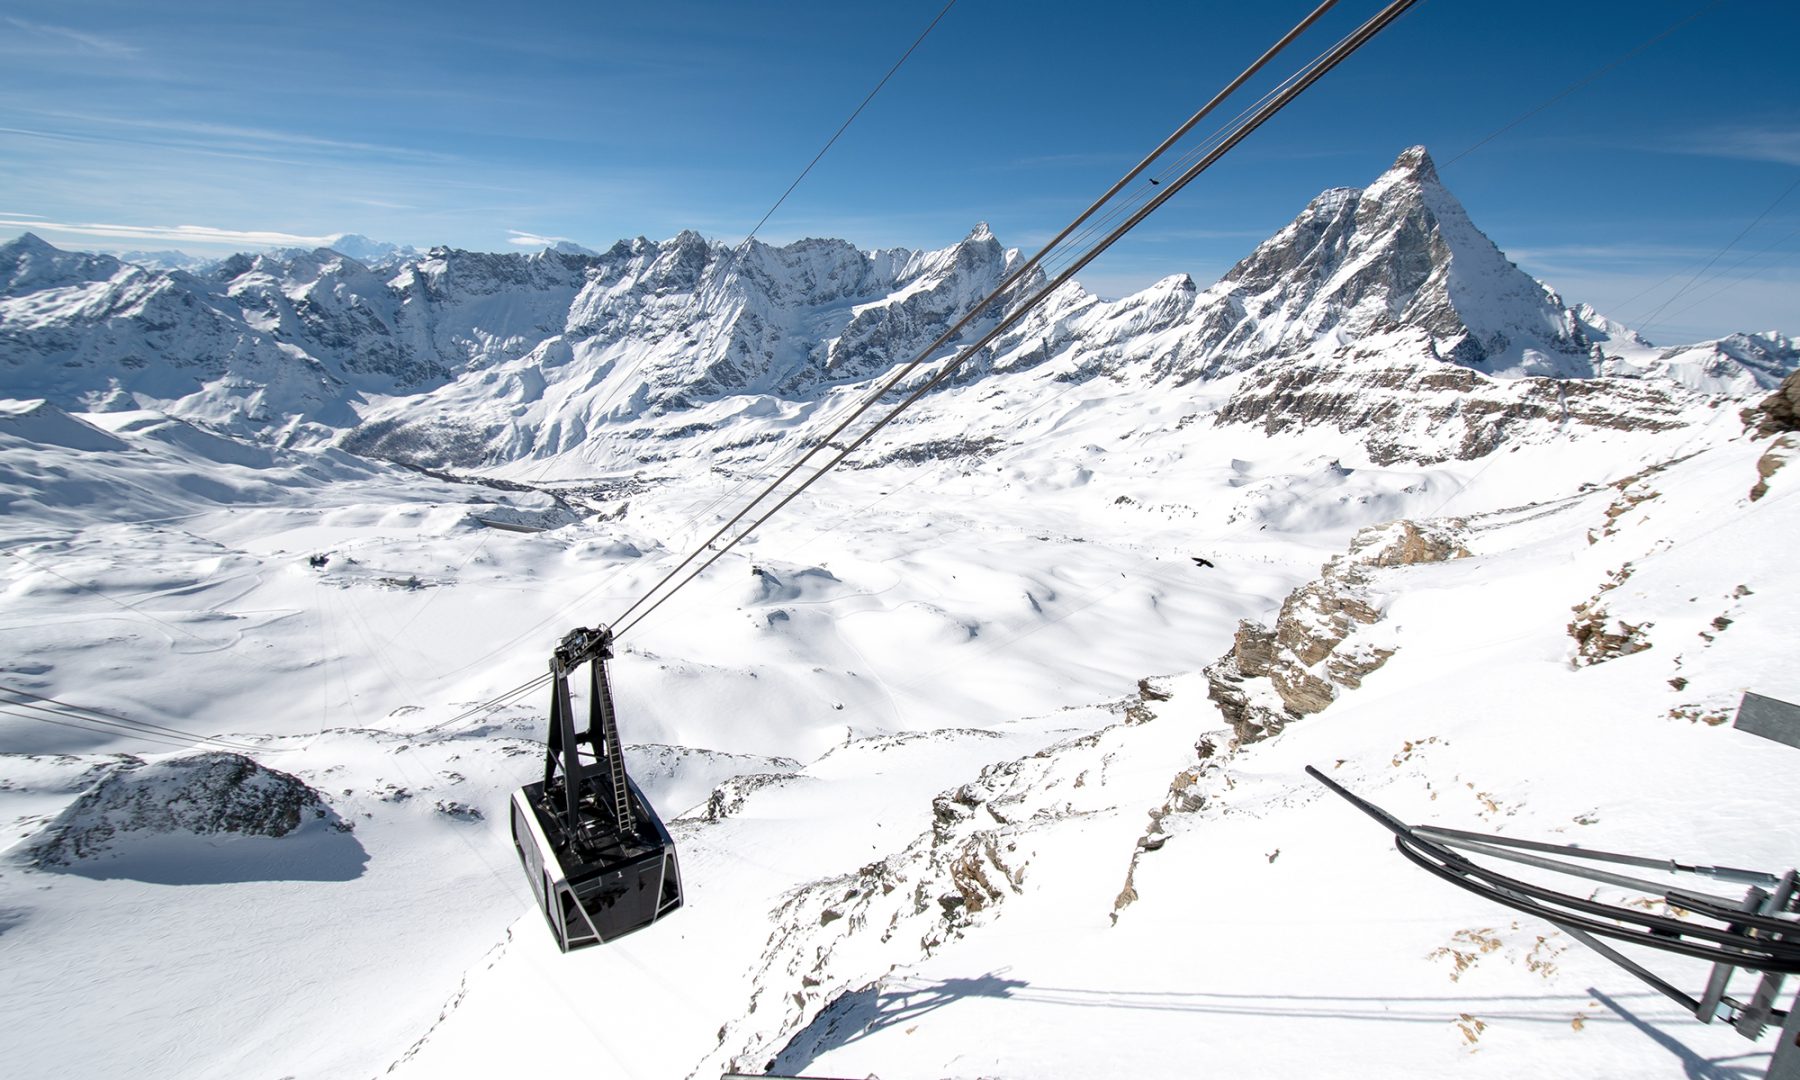 The area of Monte Cervino/Matterhorn - namely Cervinia and Zermatt occupies the fifth place in the My Voucher Codes ranking.My Voucher Codes ranking of the Best European Ski Resorts 2018.